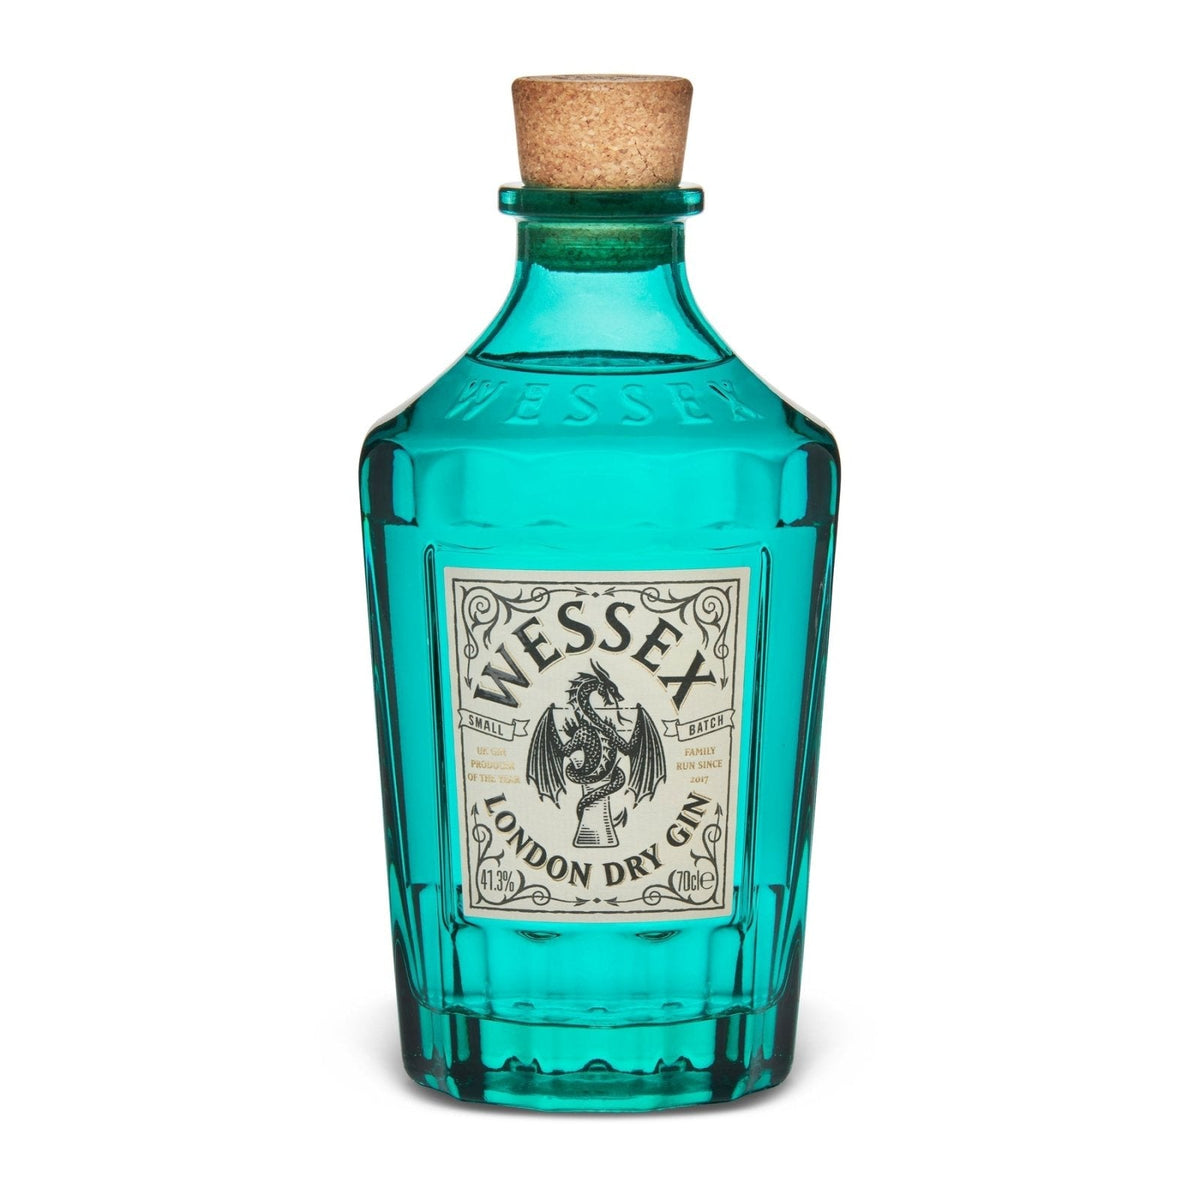 Wessex London Dry Gin, 41.3%